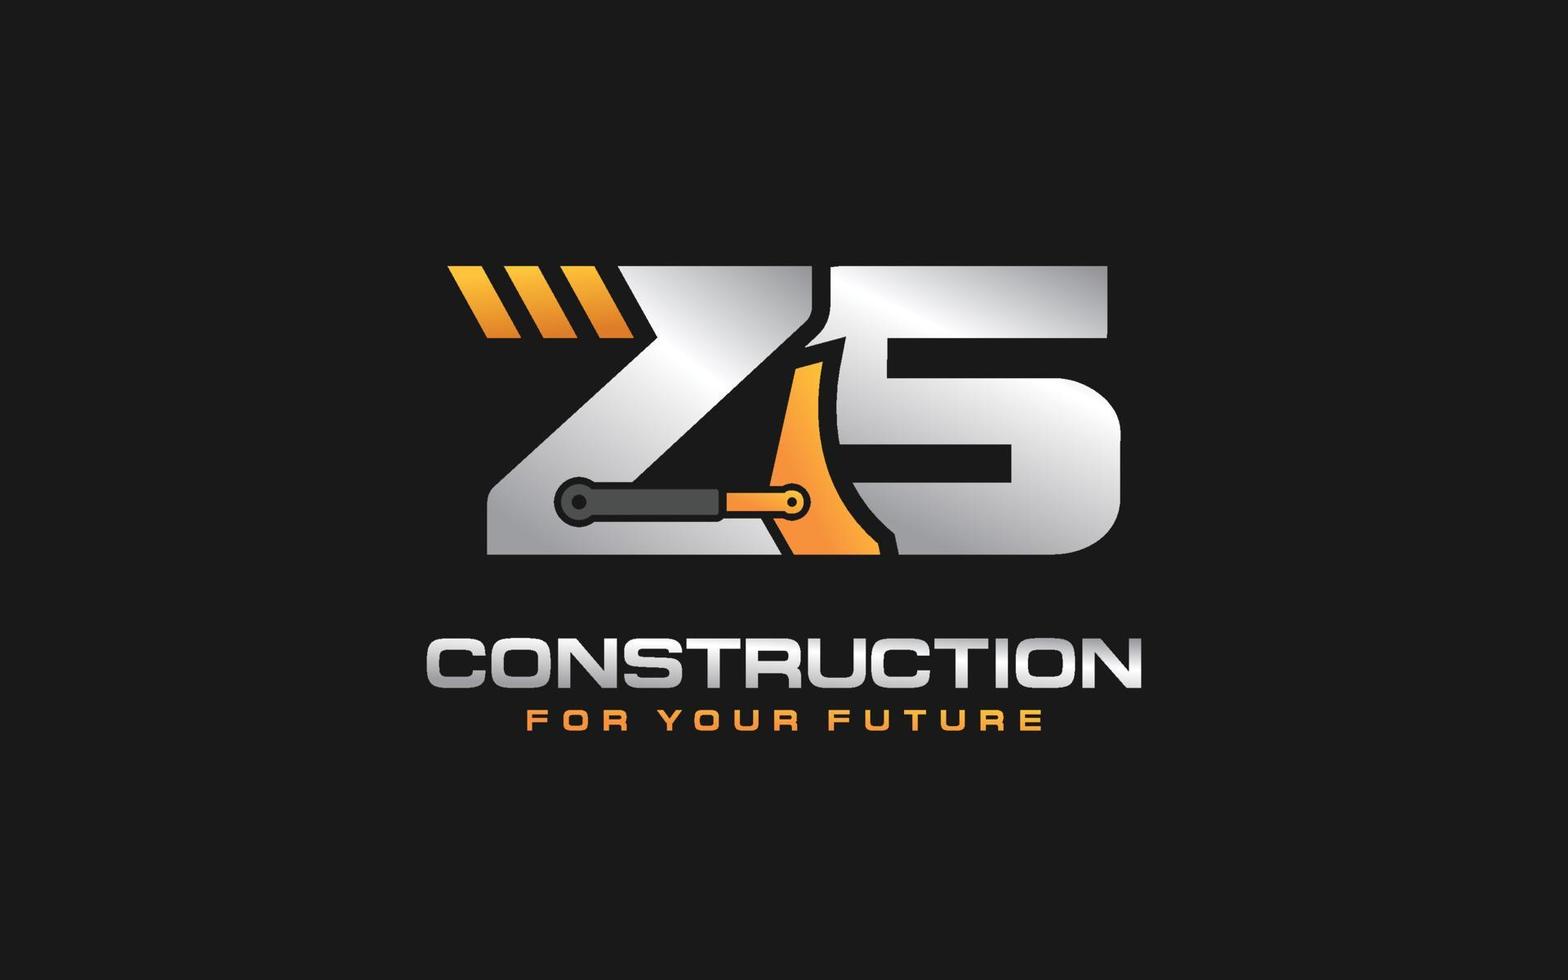 ZS logo excavator for construction company. Heavy equipment template vector illustration for your brand.